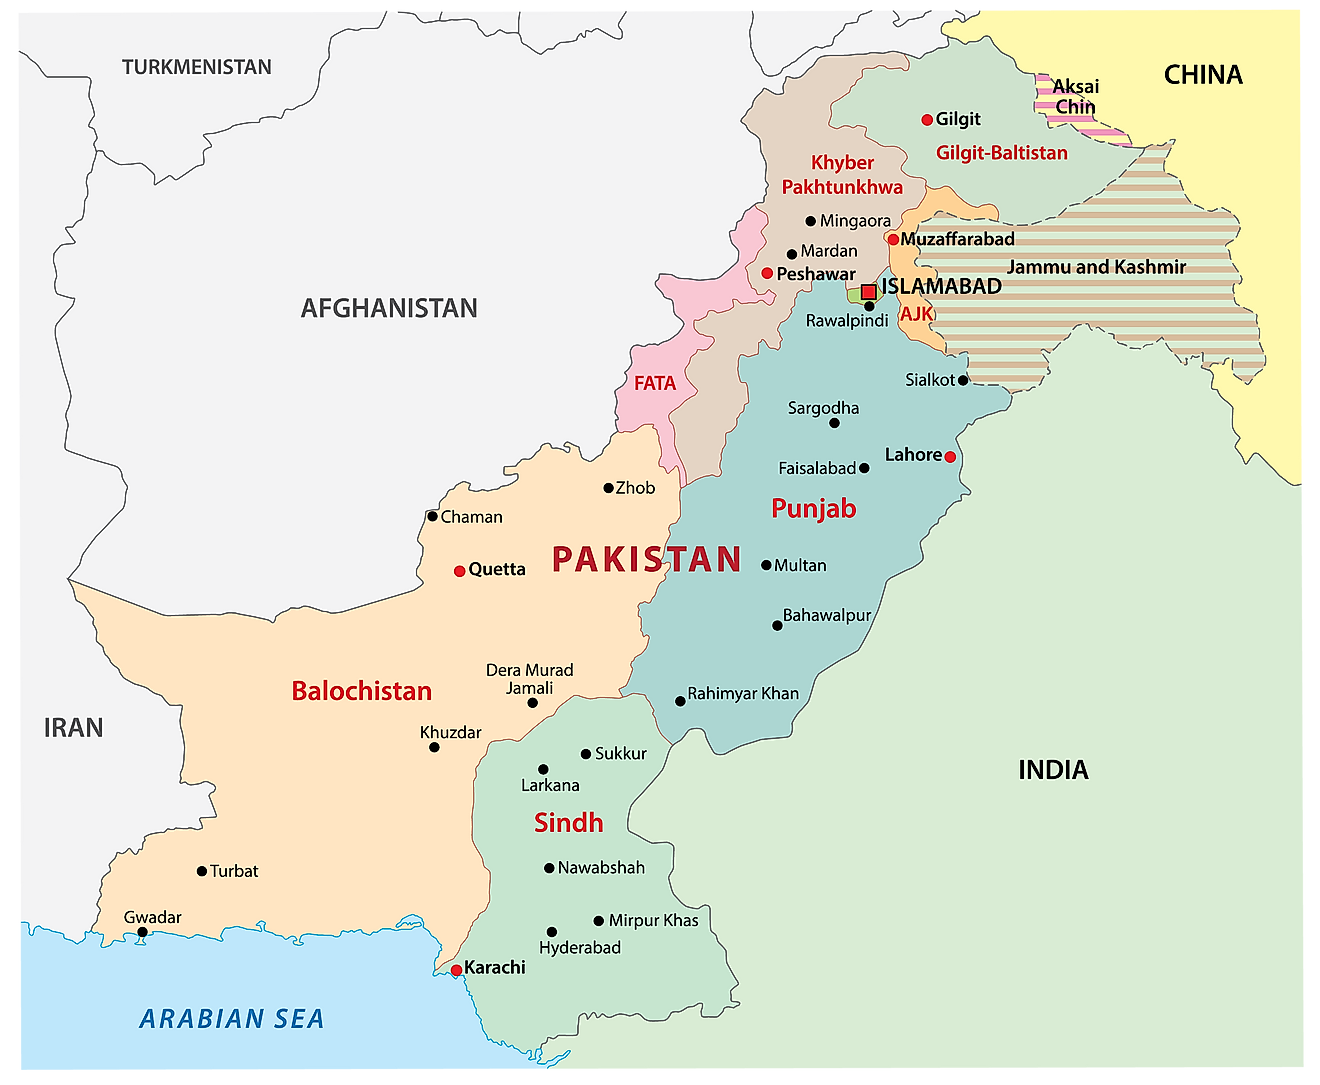 Political Map of Pakistan showing the major administrative divisions and the capital city of Islamabad.